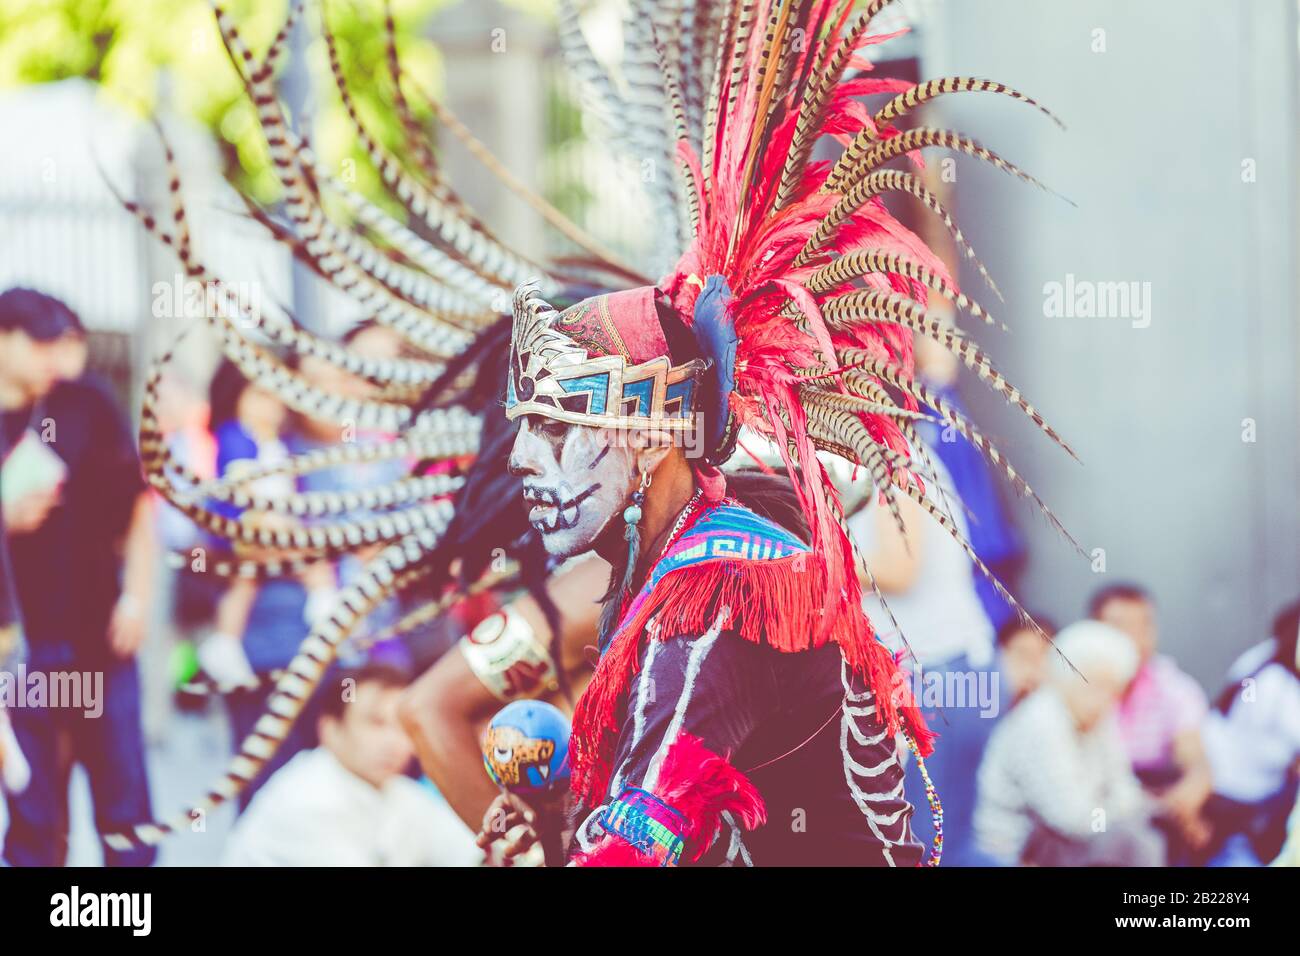 MEXICO CITY, MEXICO - FEBRUARY 17, 2020: Aztec dancers in traditional costumes dancing in the Zocalo in Mexico City, DF, Mexico. Stock Photo